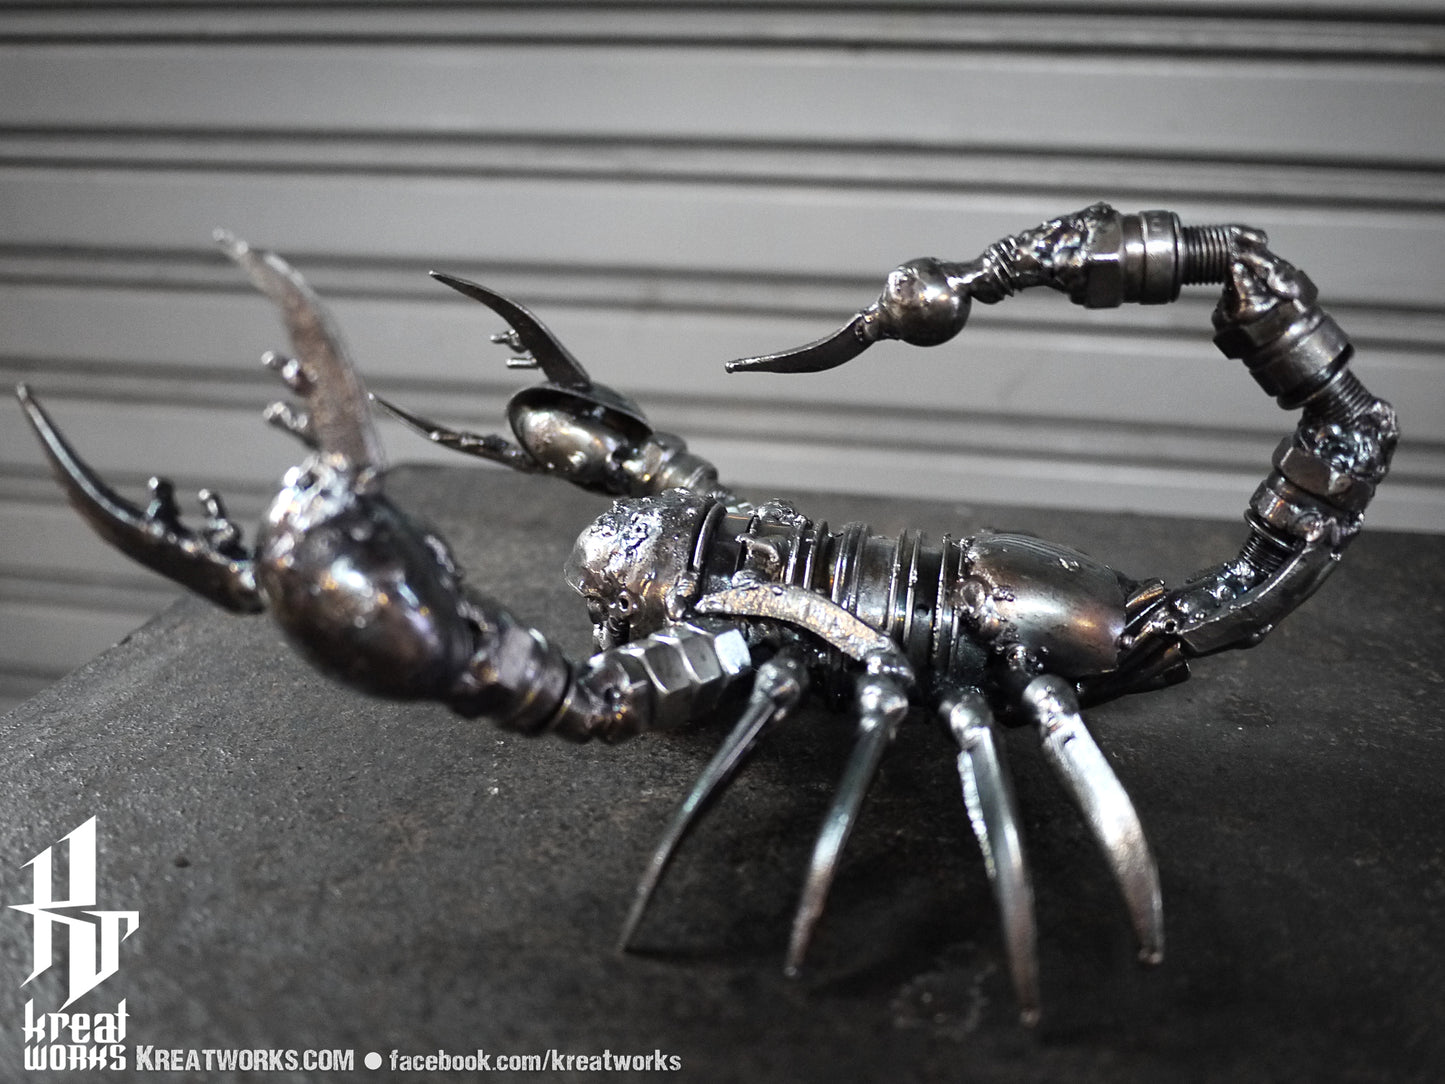 Metal Poison Scorpion (small item) / Recycle Metal Sustainable Sculpture Art